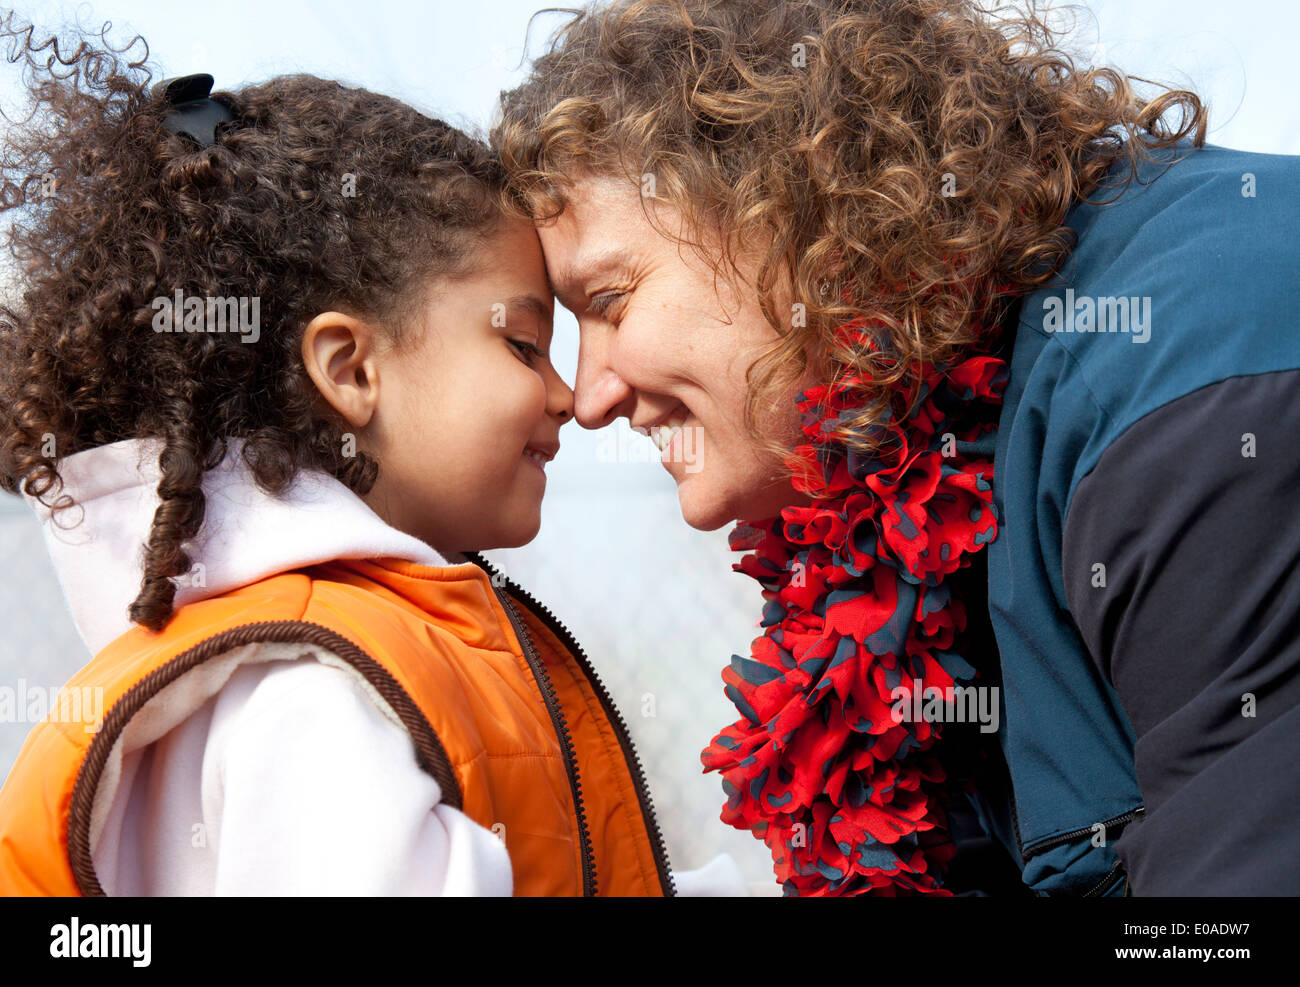 mother and daughter nose to nose showing affection Stock Photo